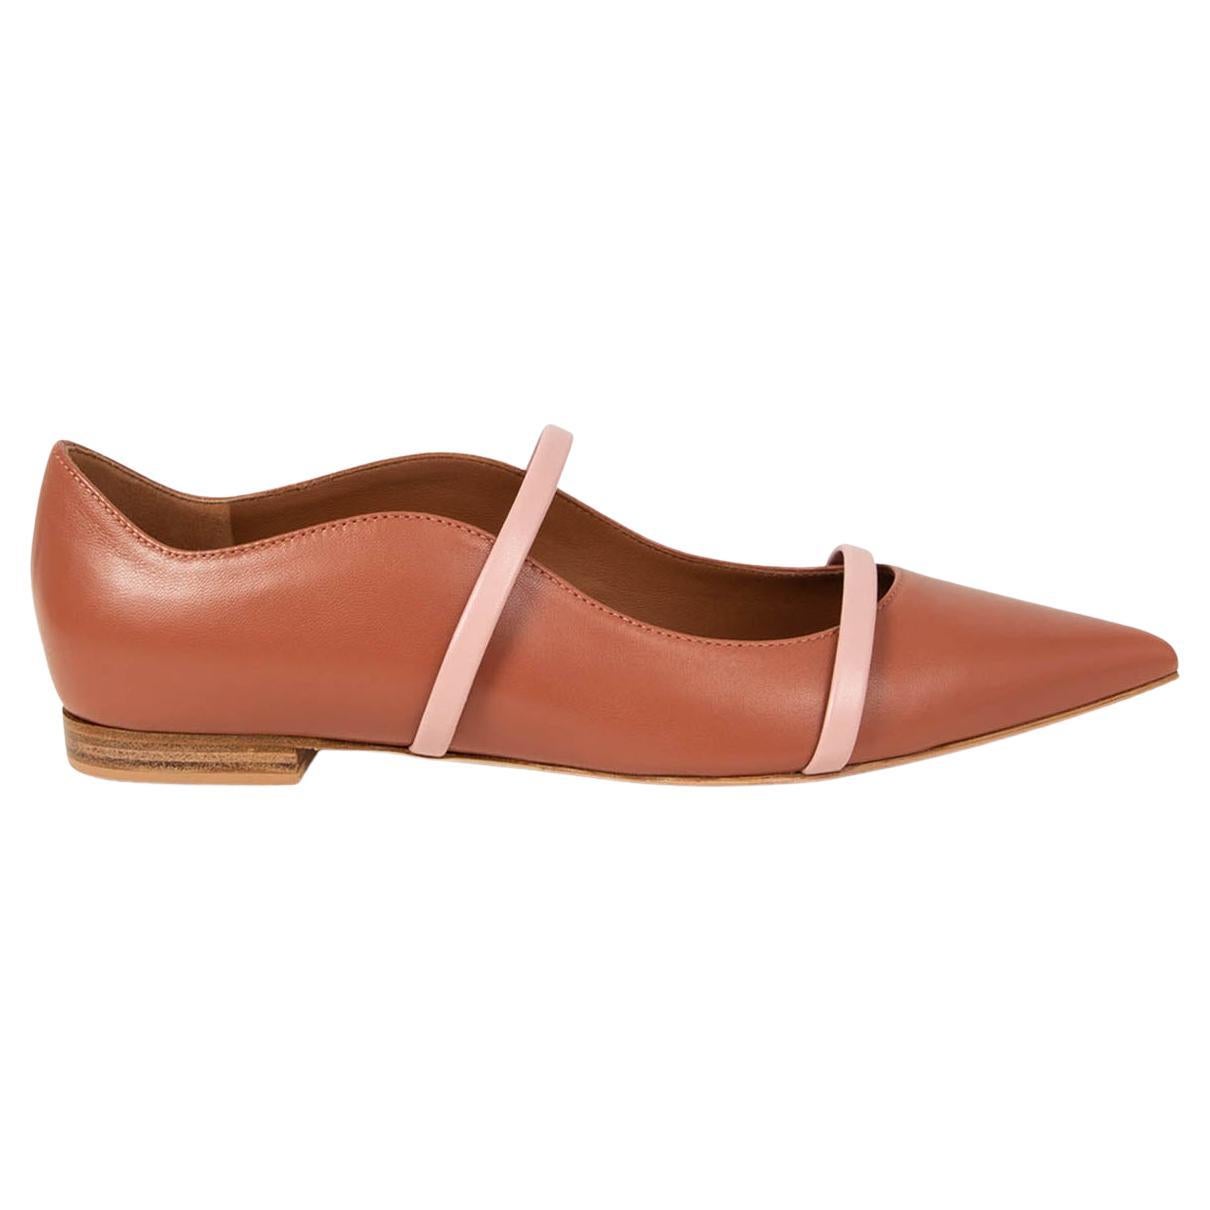 MALONE SOULIERS brick & pink leather MAUREEN Ballet Flats Shoes 38.5 For Sale